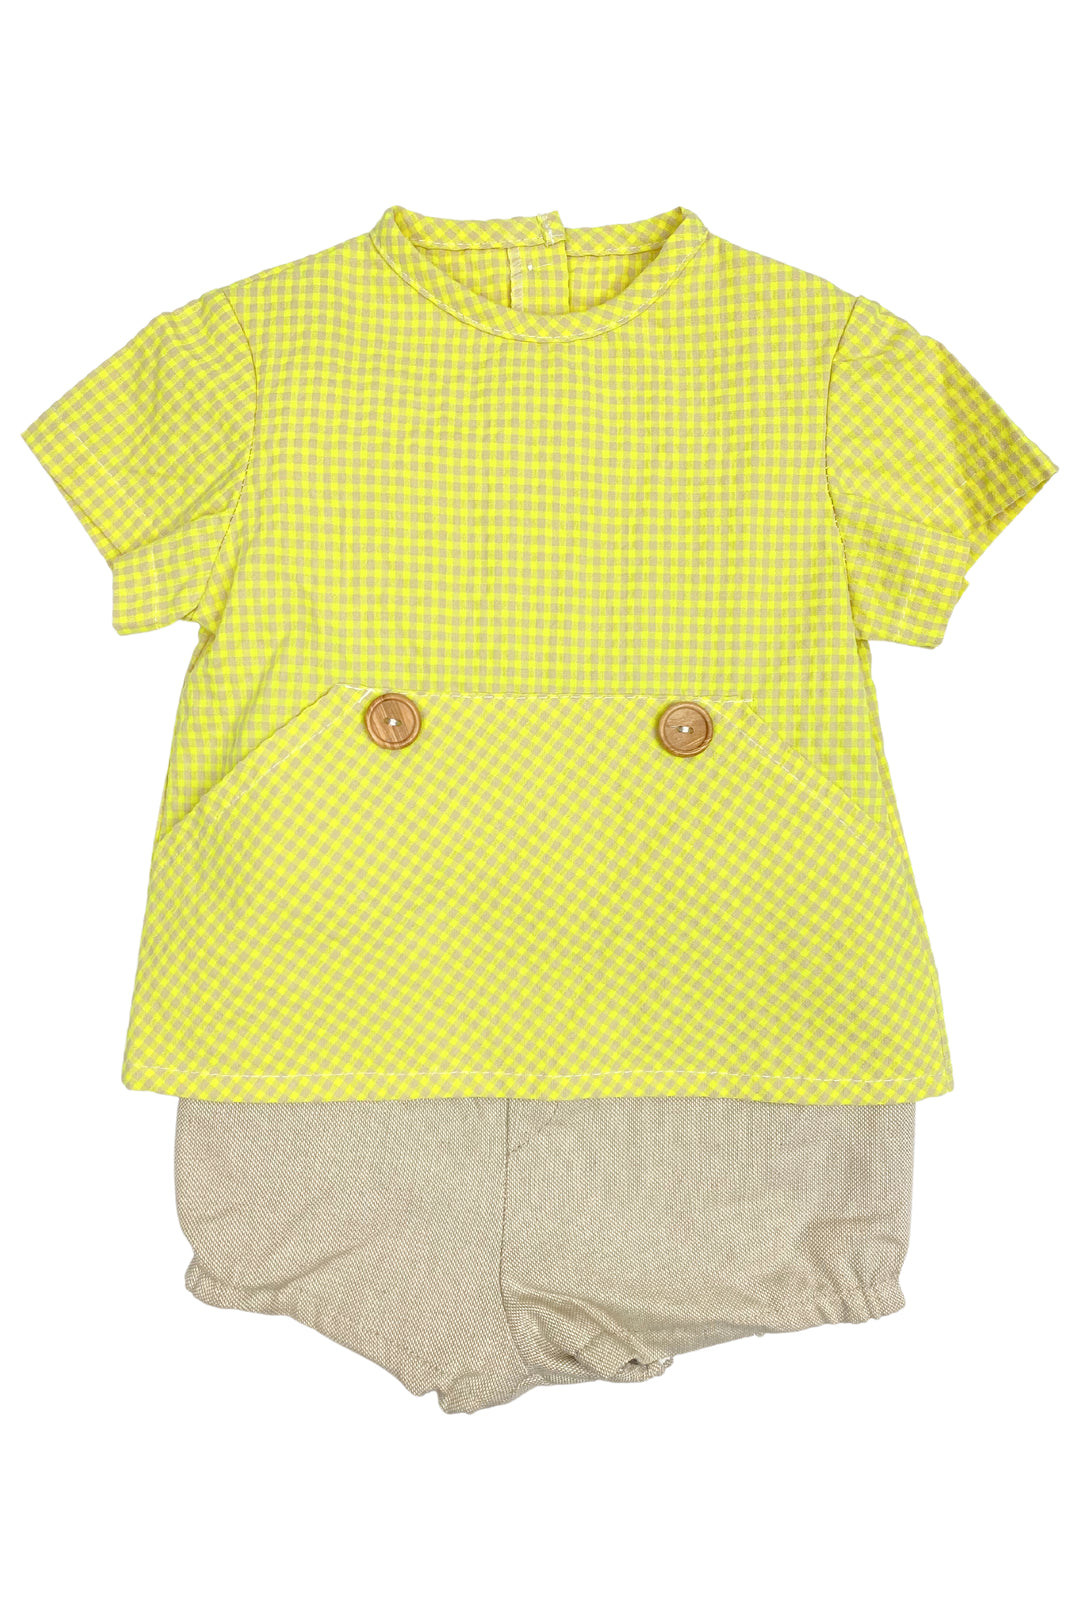 Valentina Bebes "Riley" Yellow & Beige Gingham Shirt & Shorts | iphoneandroidapplications